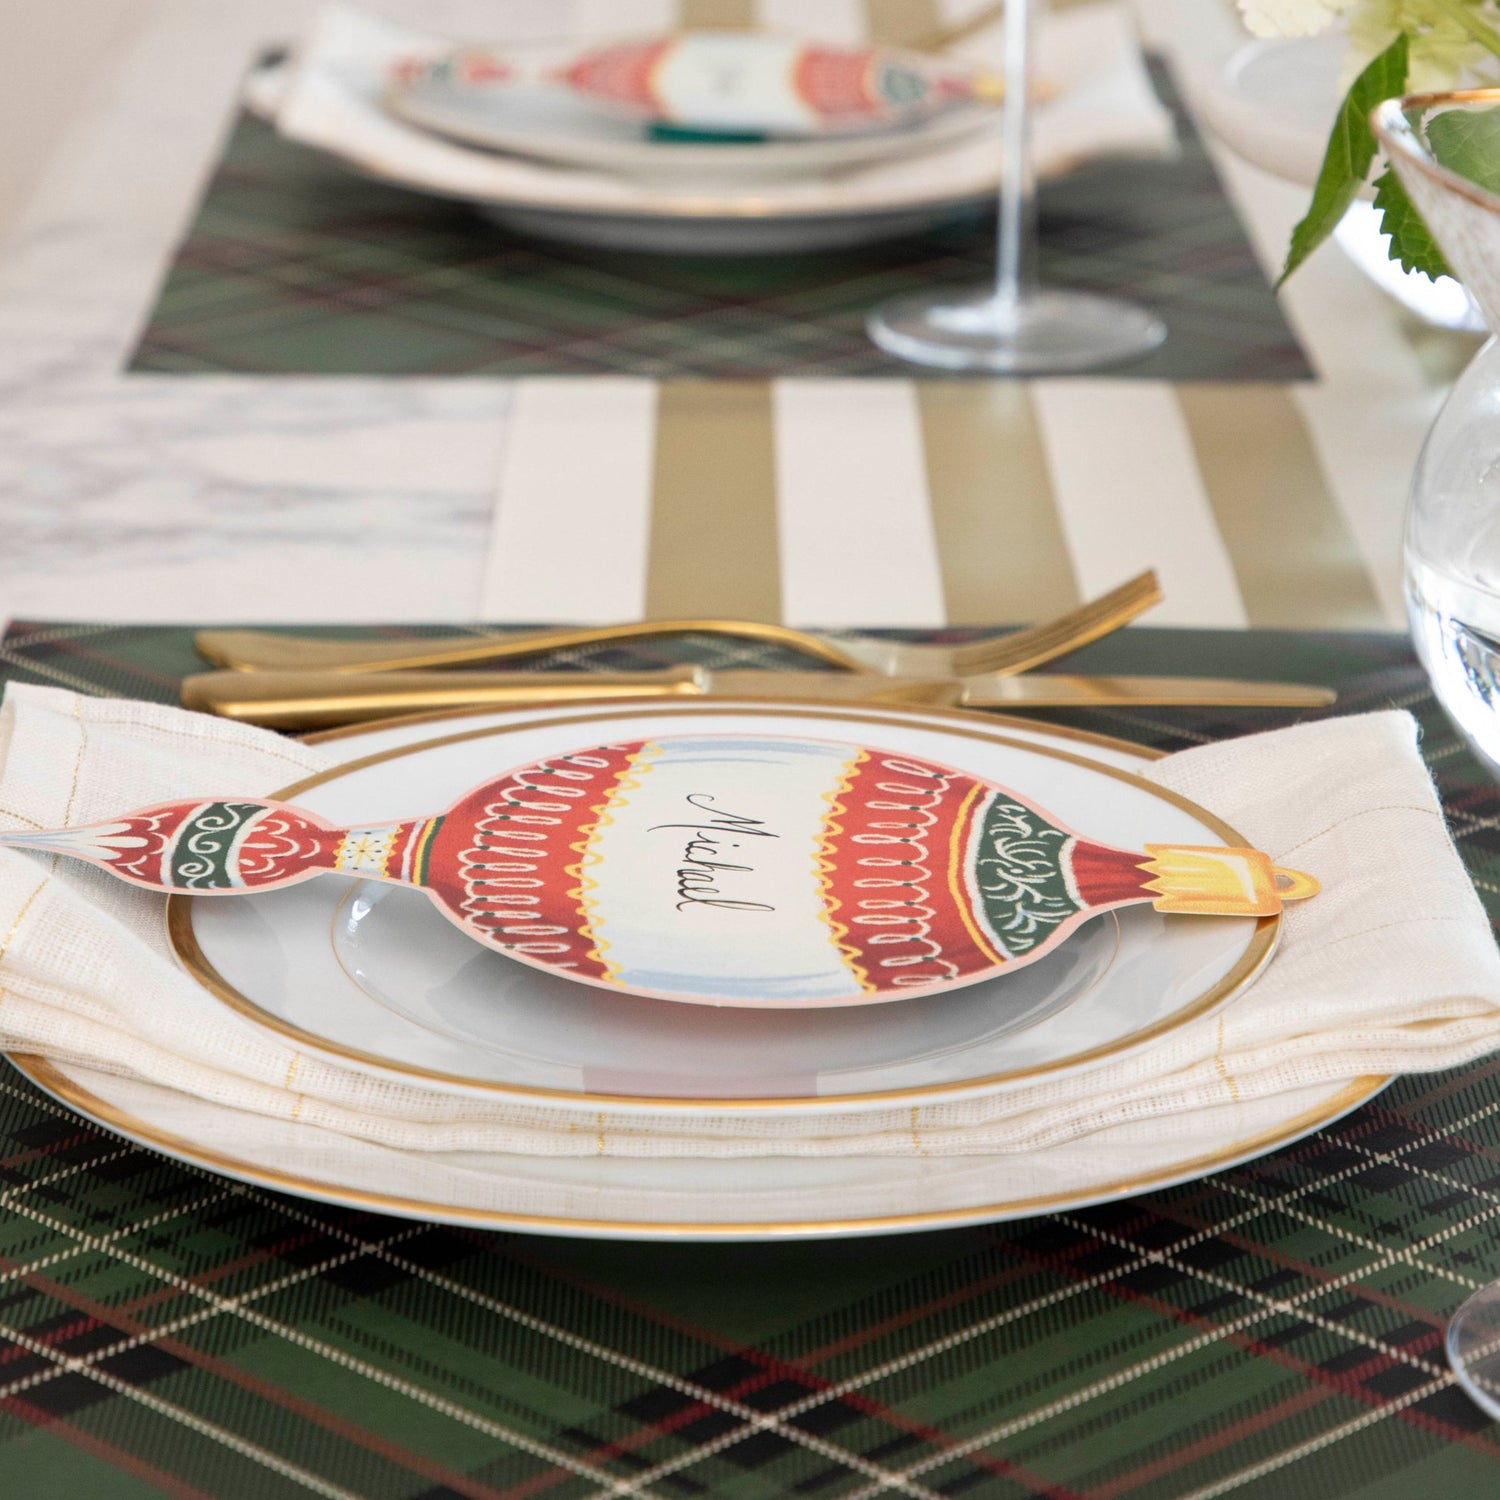 Close-up of the Green Plaid Placemat under a festive holiday-themed table setting.